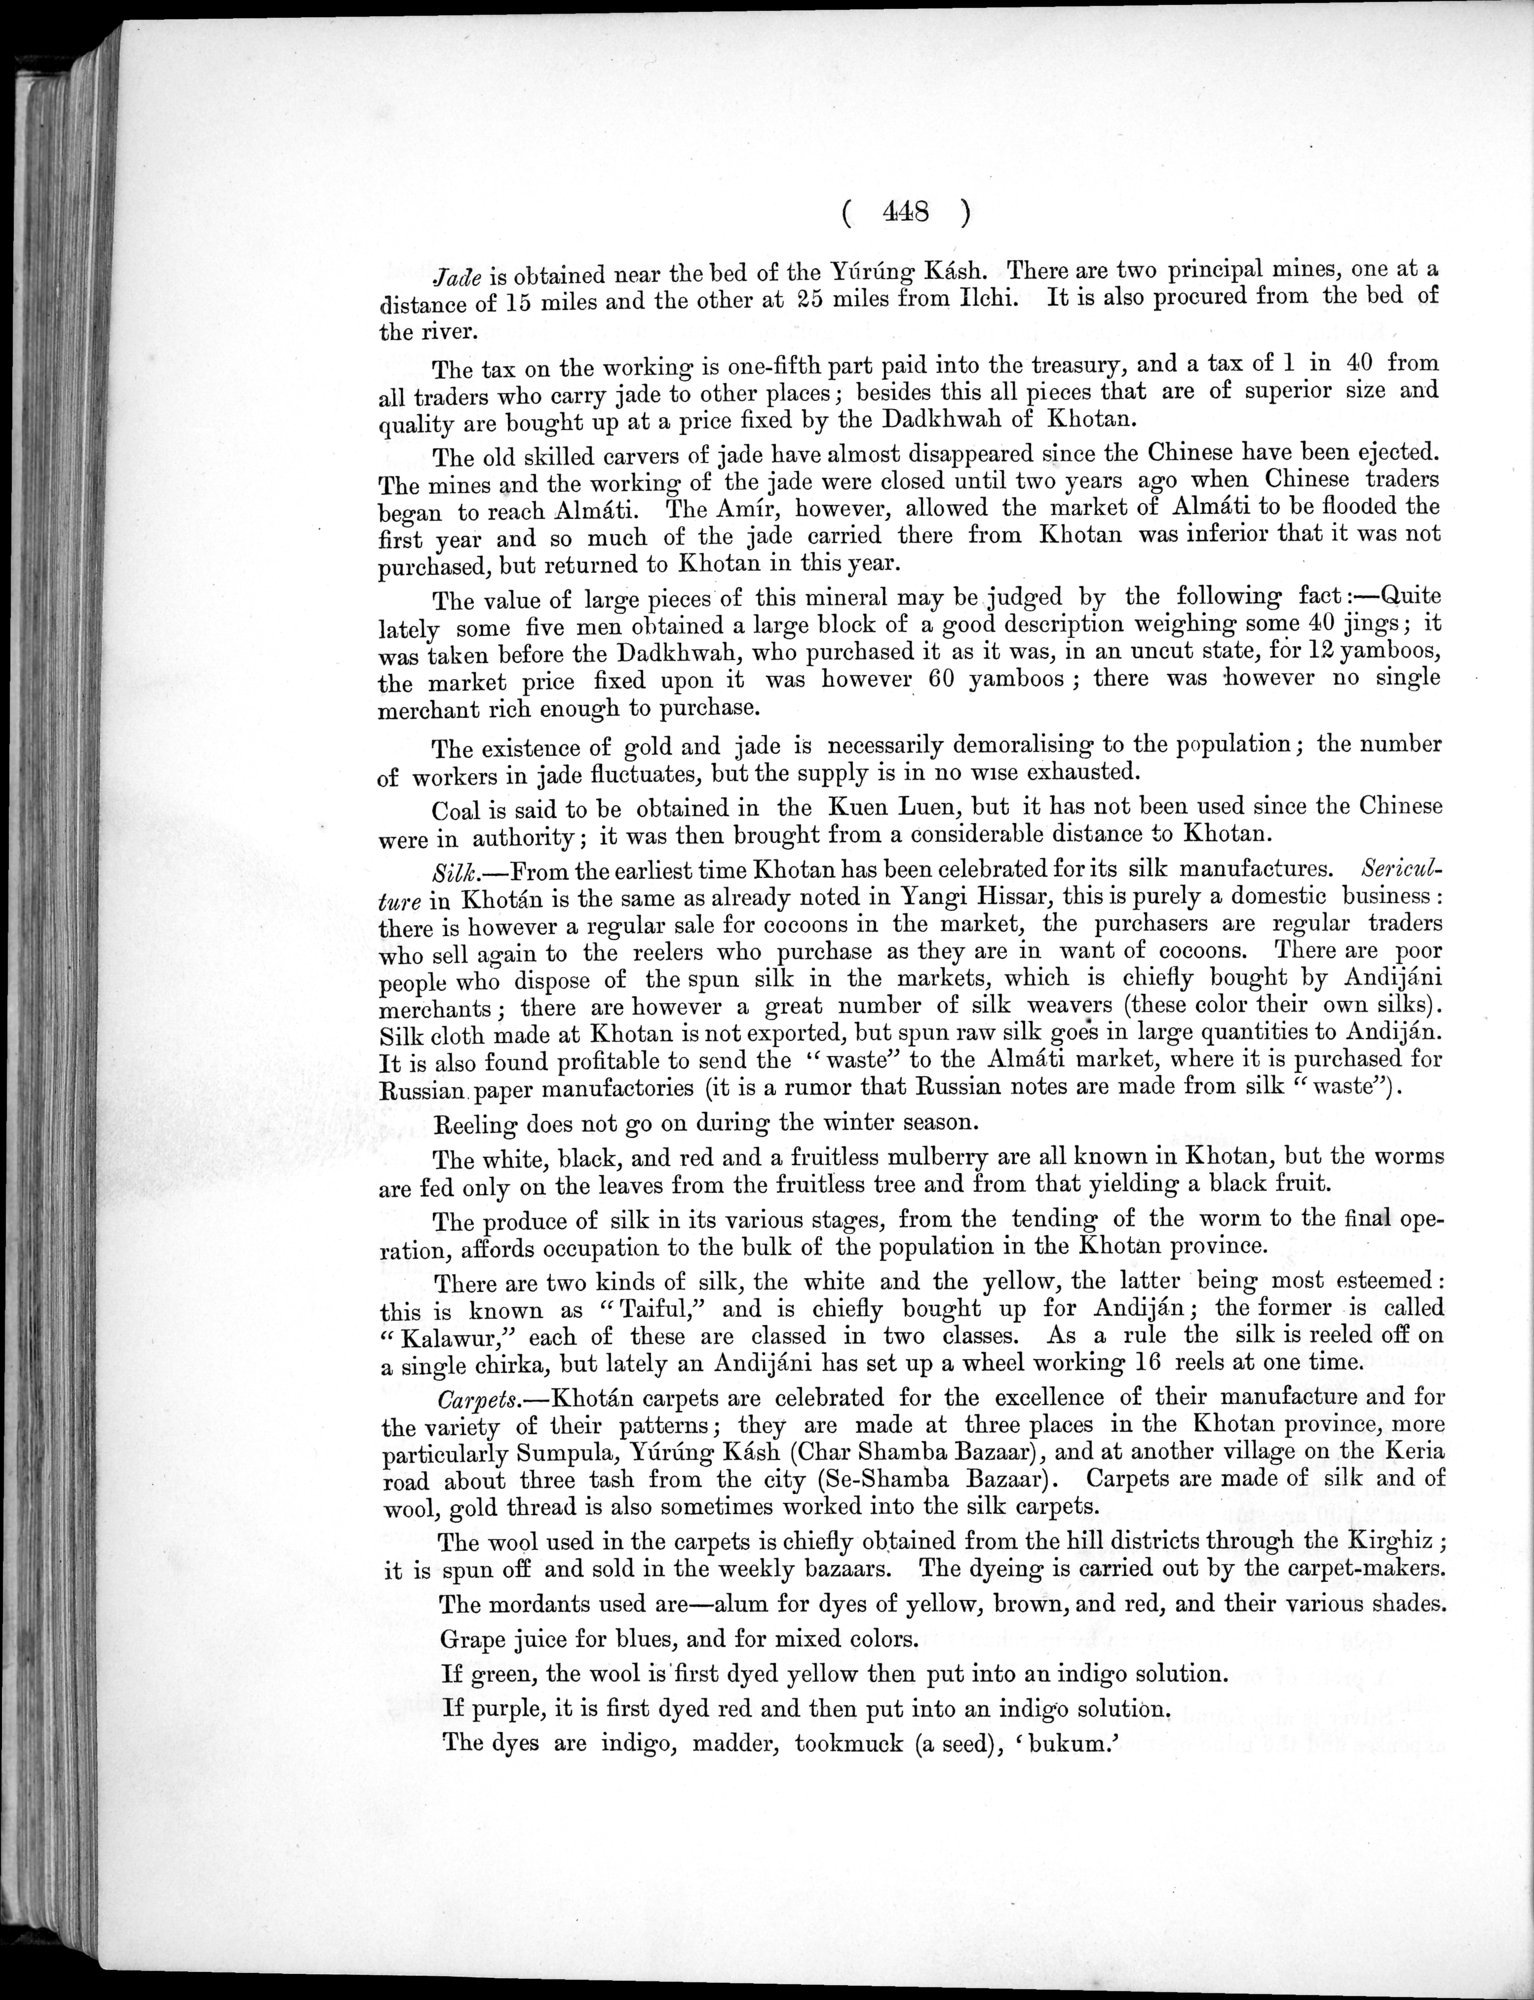 Report of a Mission to Yarkund in 1873 : vol.1 / Page 582 (Grayscale High Resolution Image)